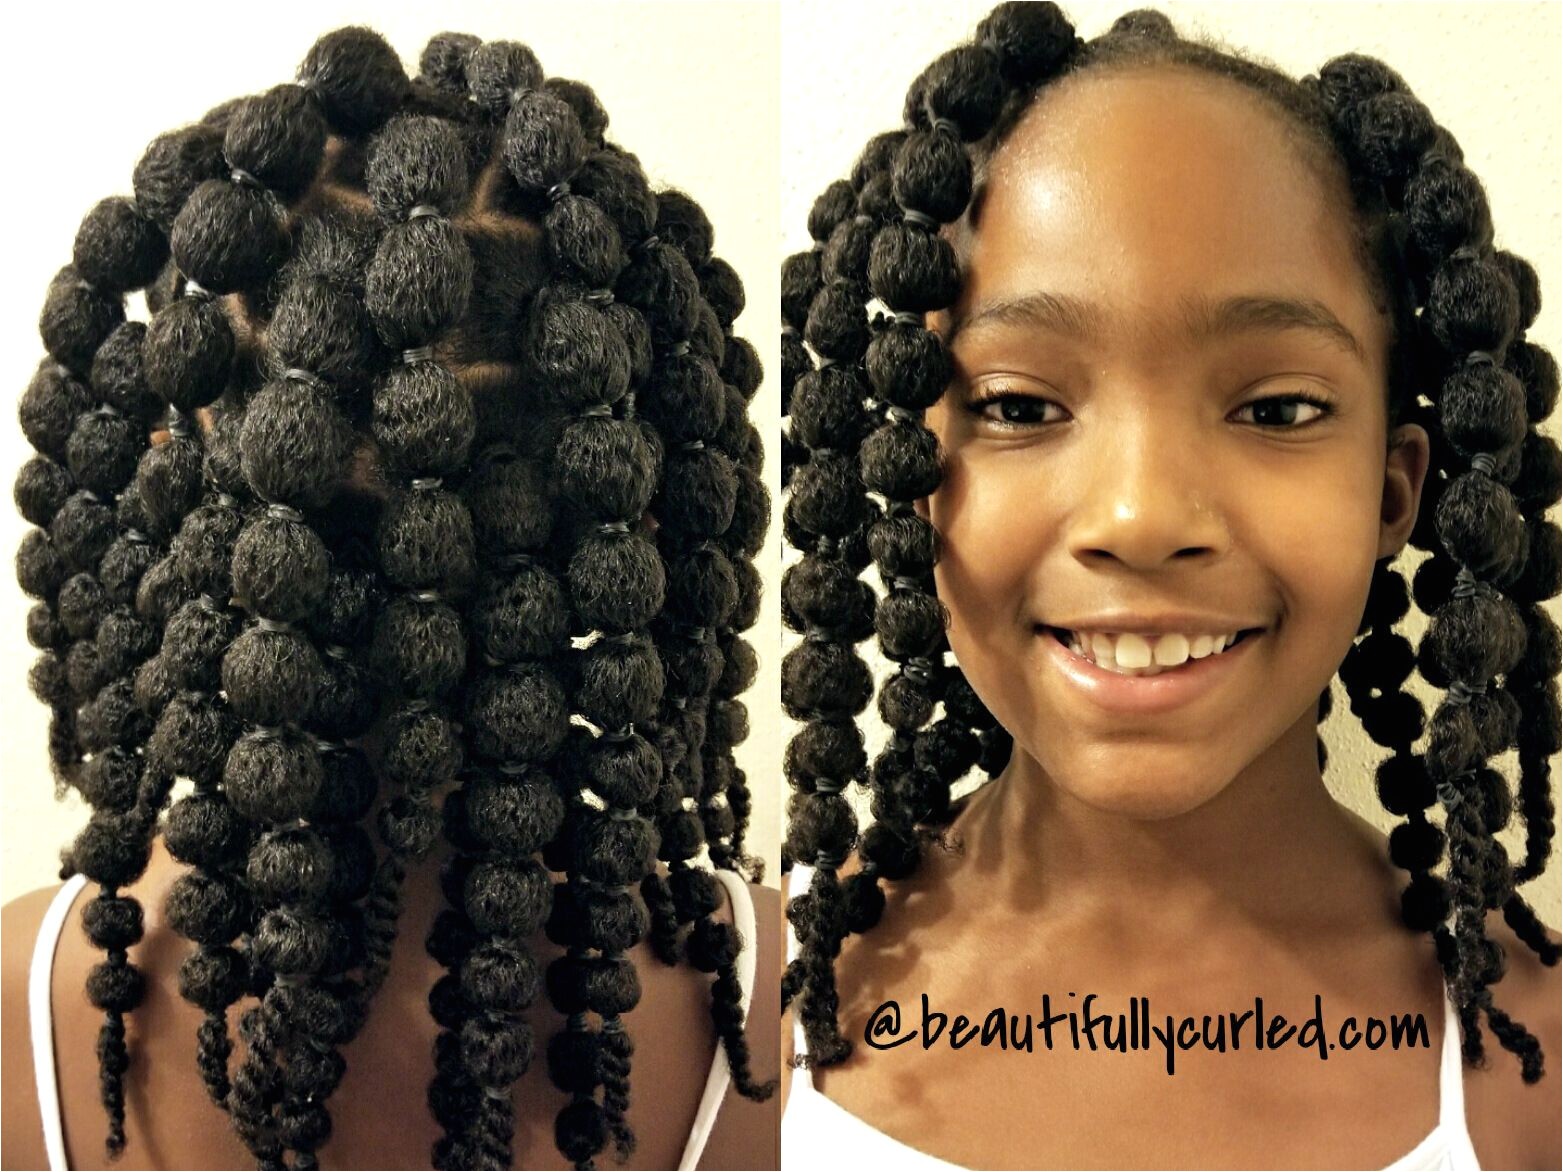 Cute Hairstyles for Small Girls Cute and Easy Hair Puff Balls Hairstyle for Little Girls to